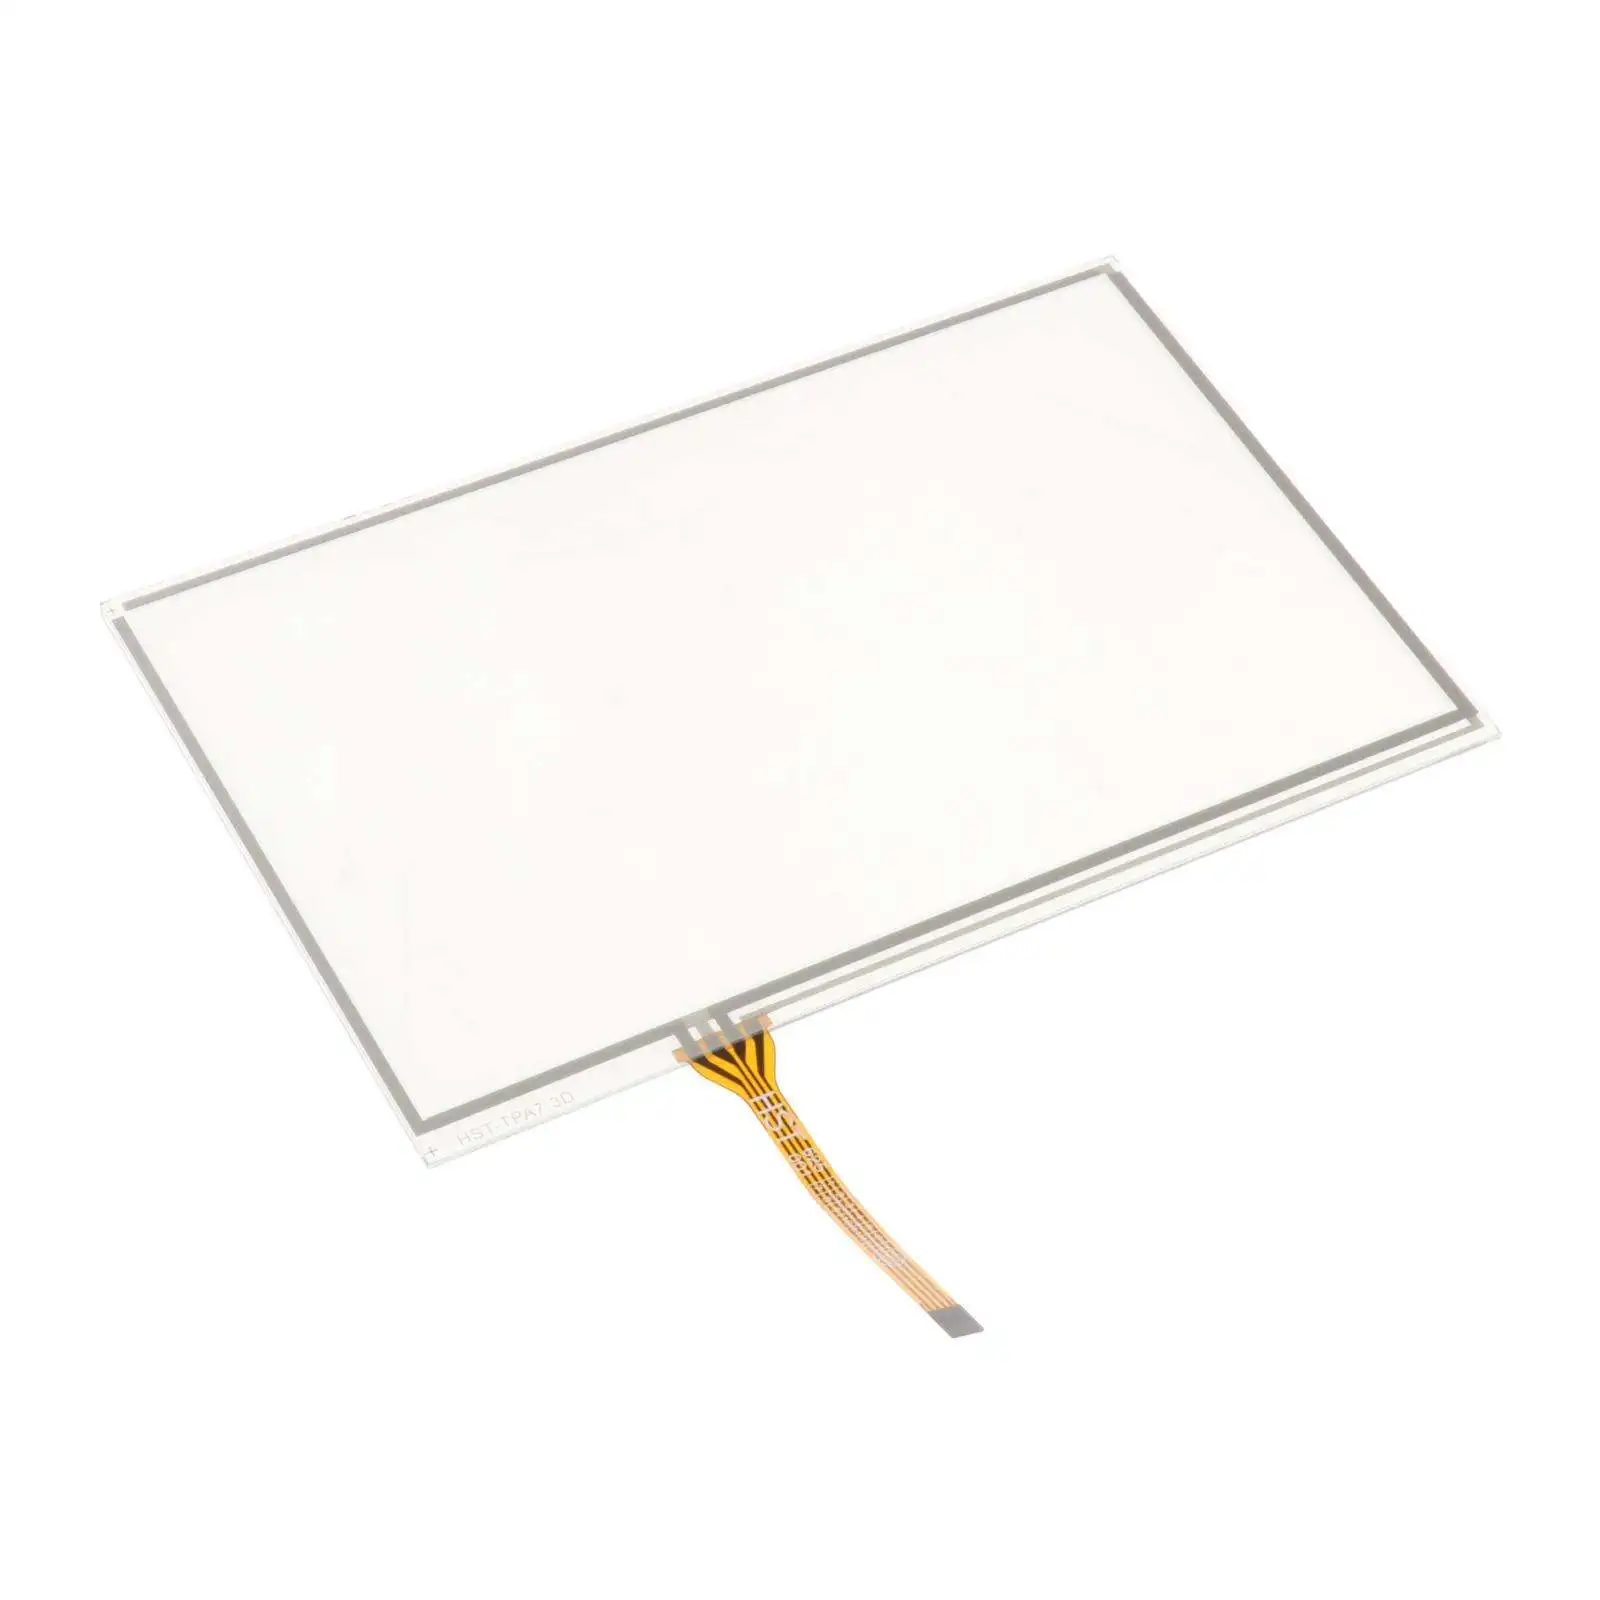 New Resistive Touch Screen Digitizer Panel Replacement Fit for Lexus IS250 IS300 IS350 ISF GS Prius Navigation